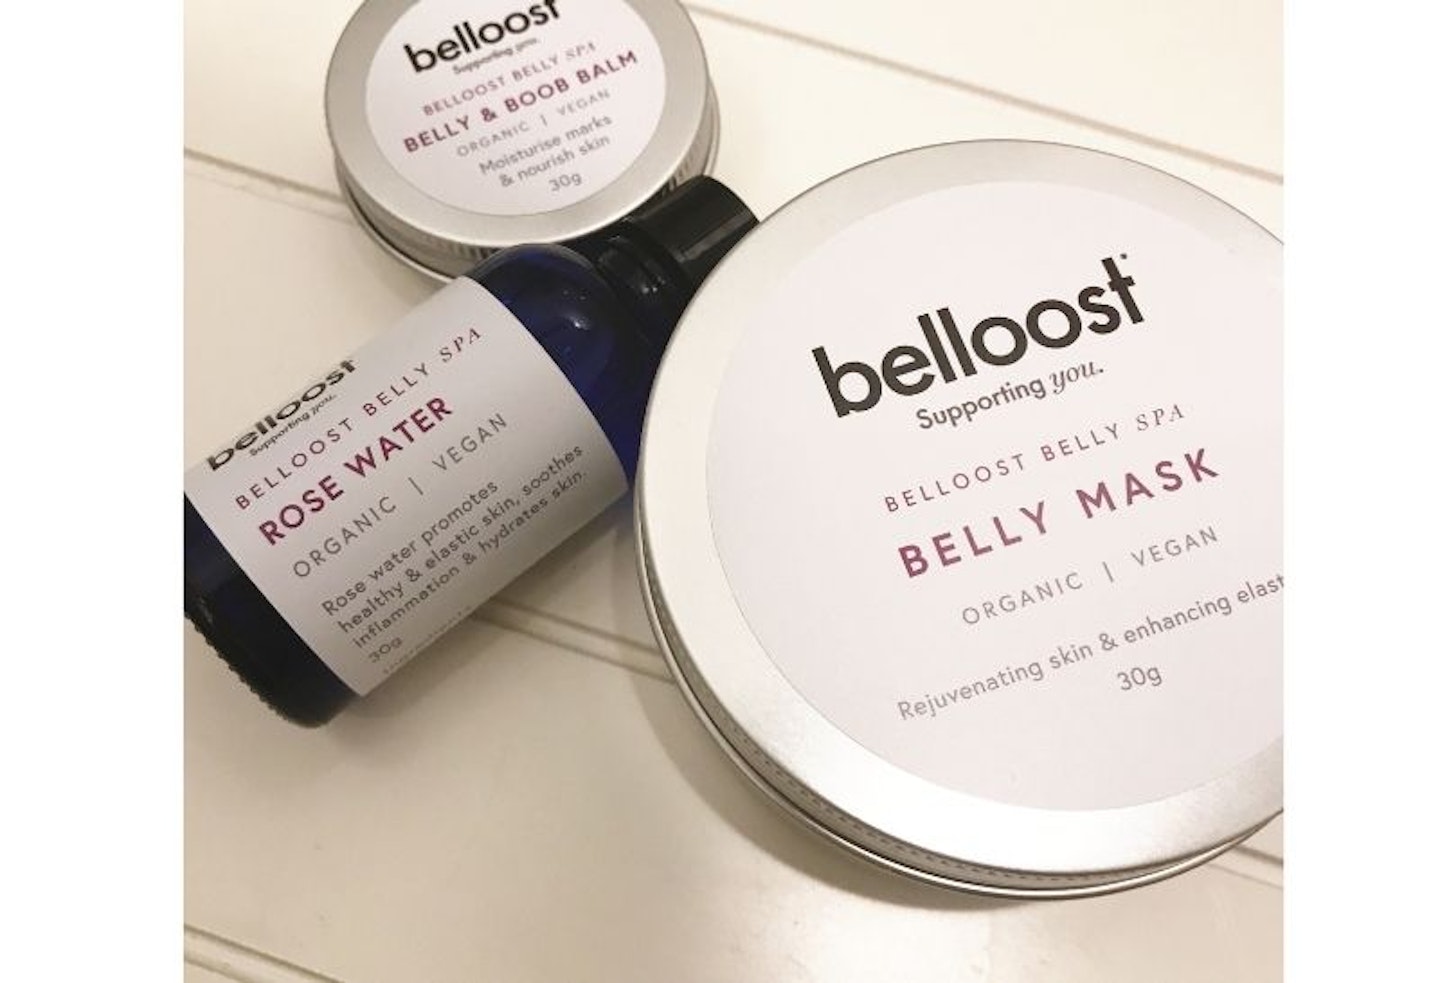 Belloost Belly Spa Kit